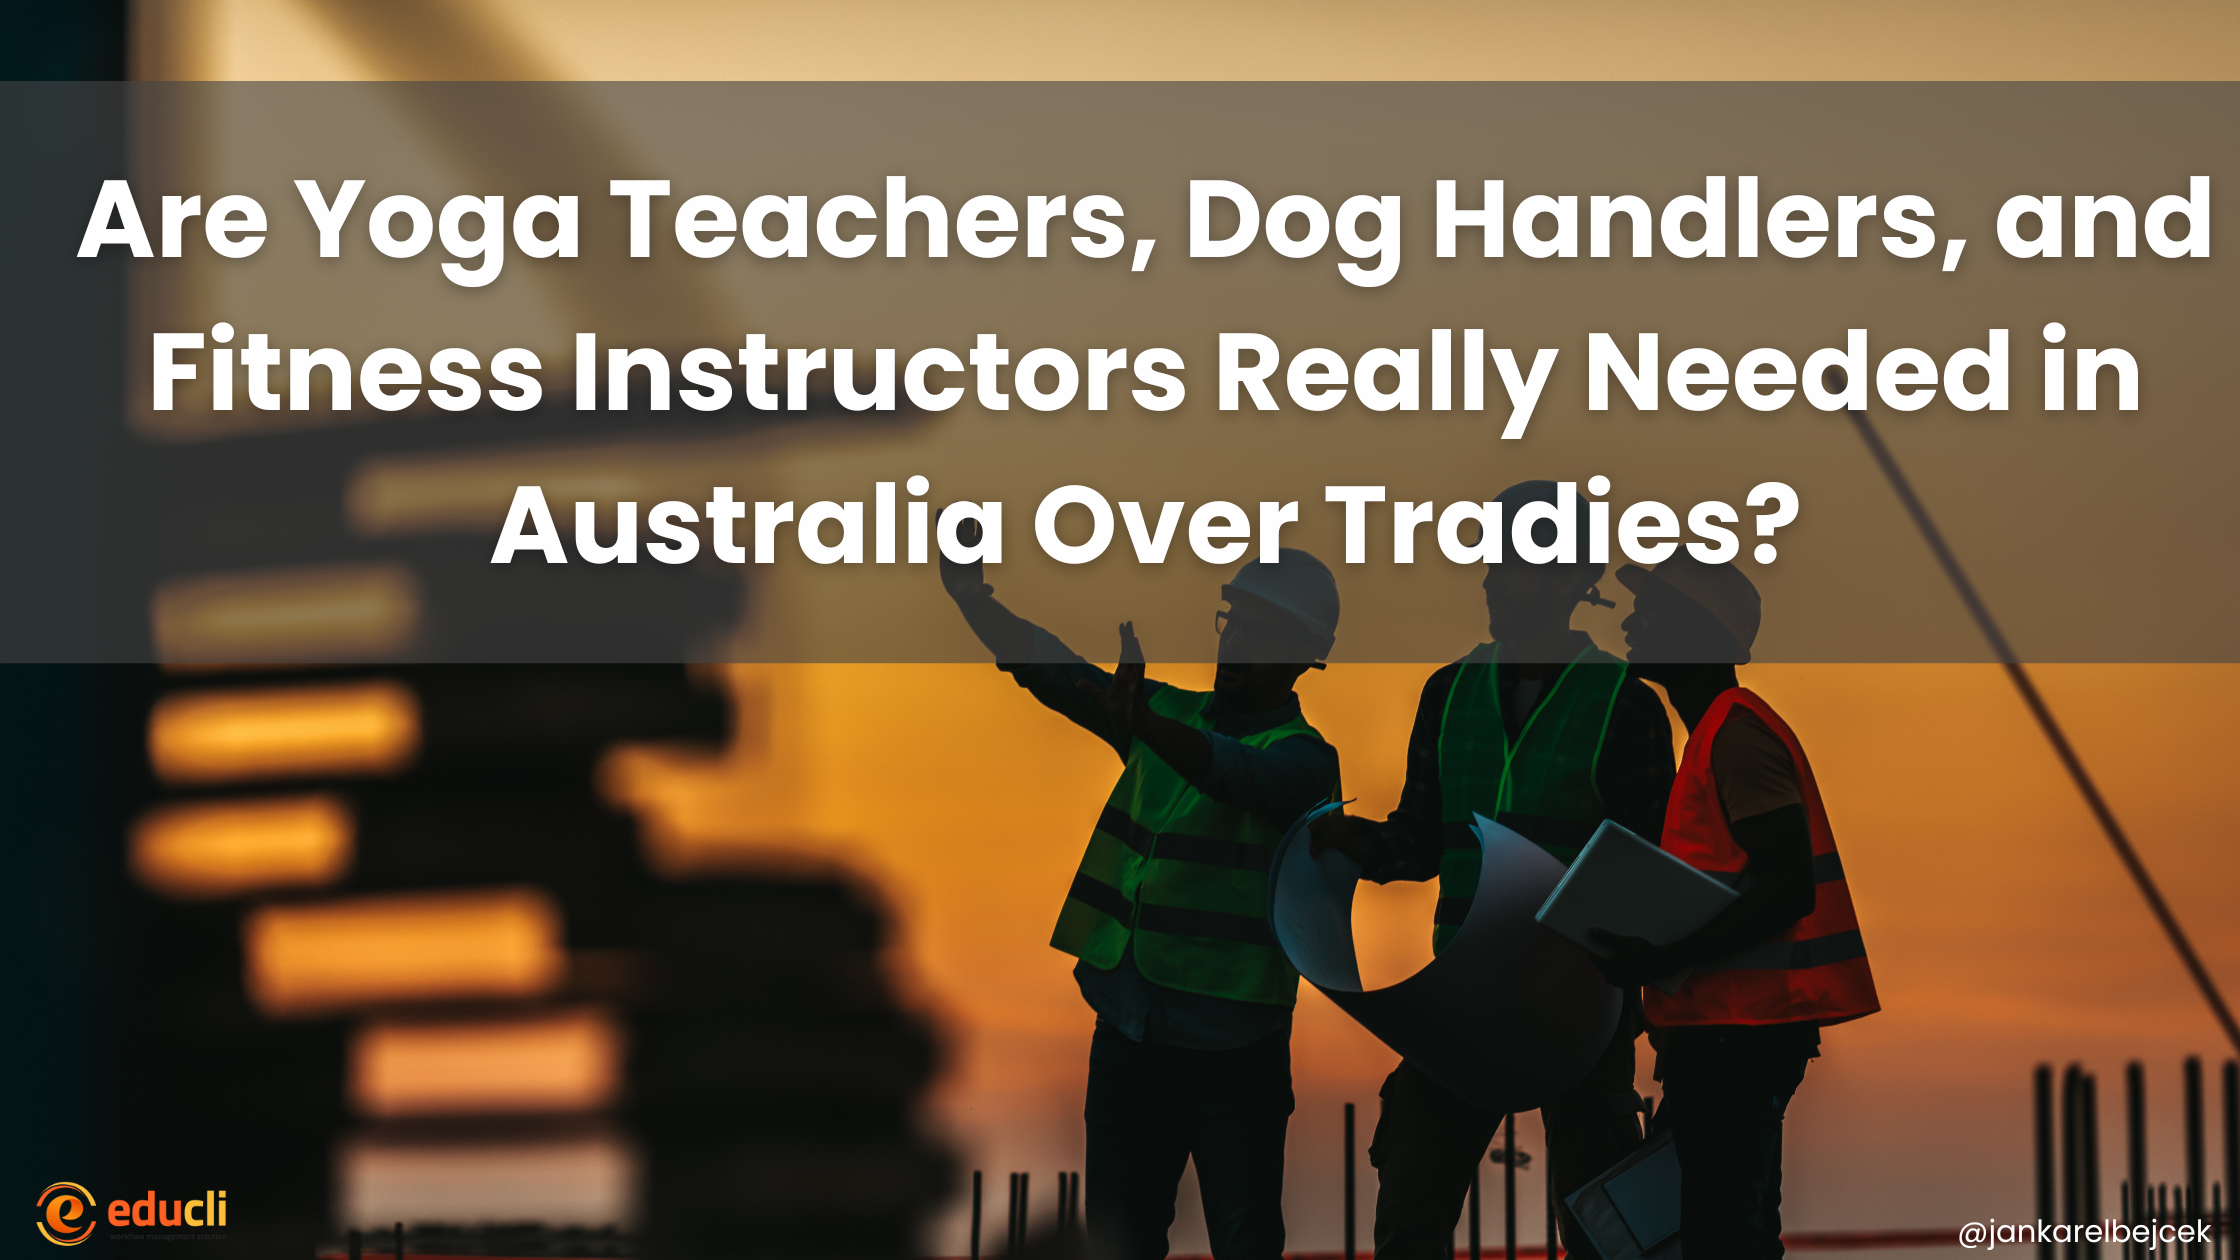 Are Yoga Teachers, Dog Handlers, and Fitness Instructors Really Needed in Australia Over Tradies?